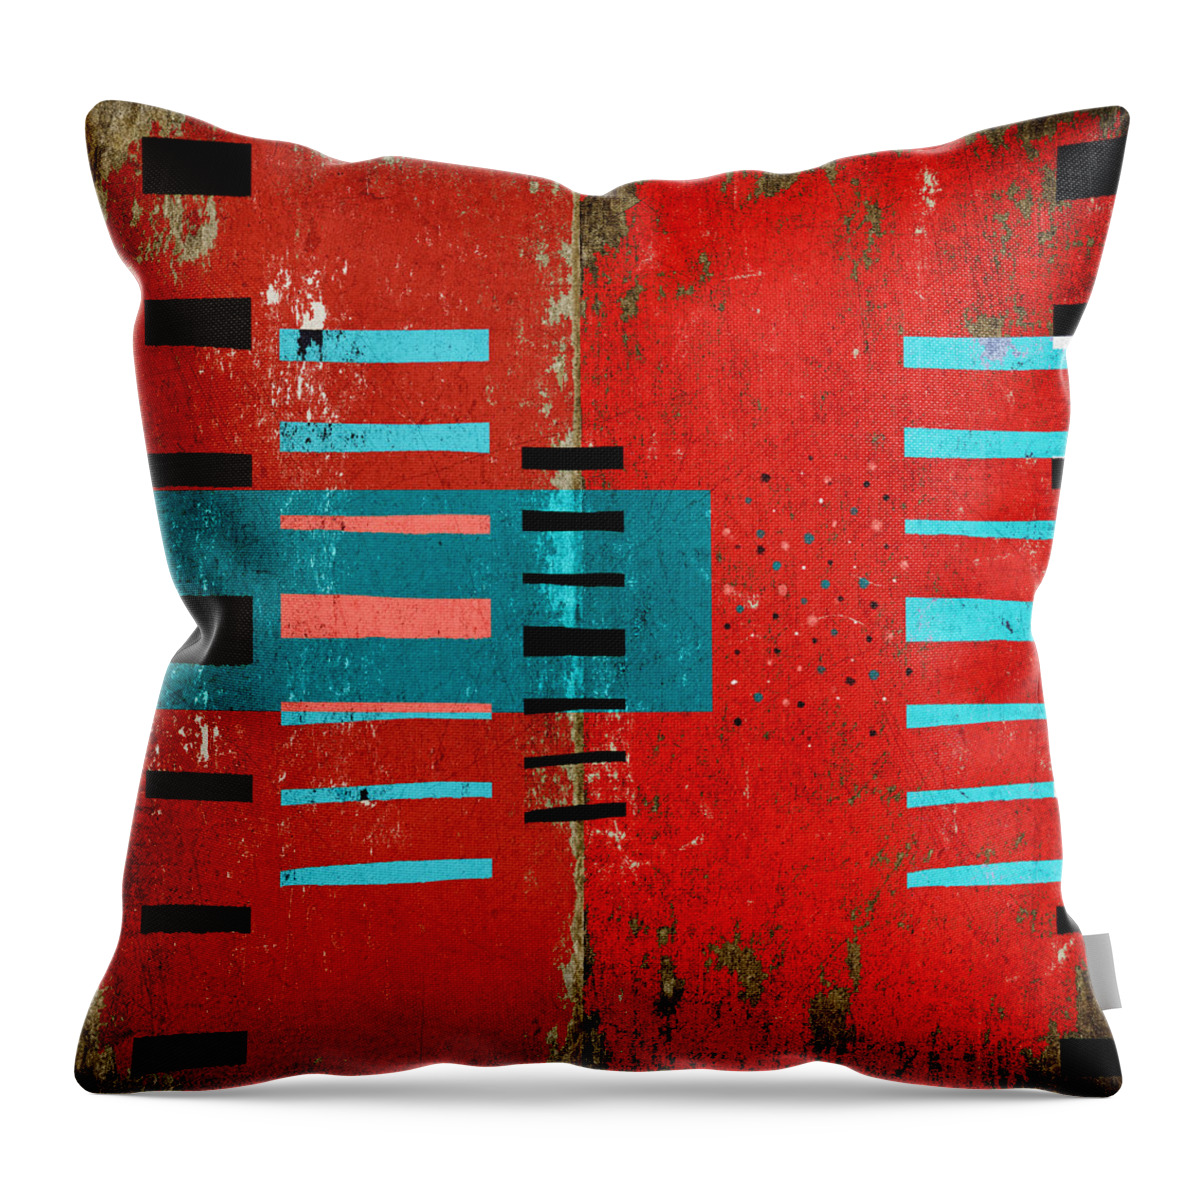 Red Throw Pillow featuring the photograph Reaching Out by Carol Leigh